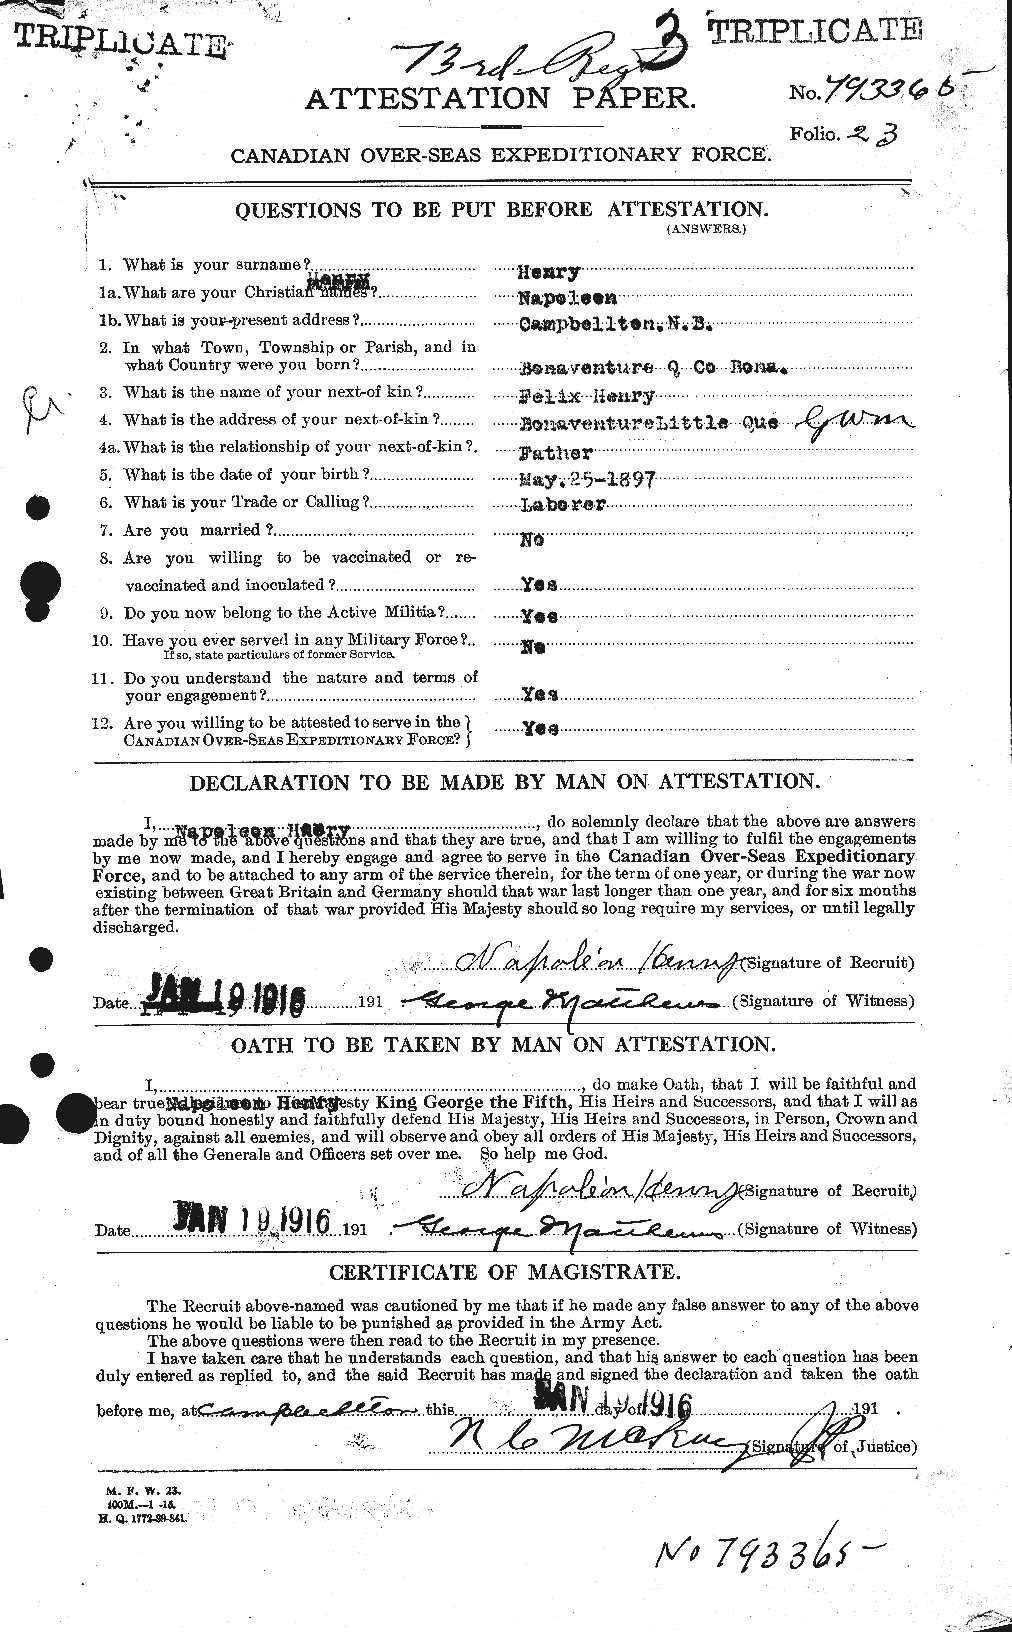 Personnel Records of the First World War - CEF 387669a